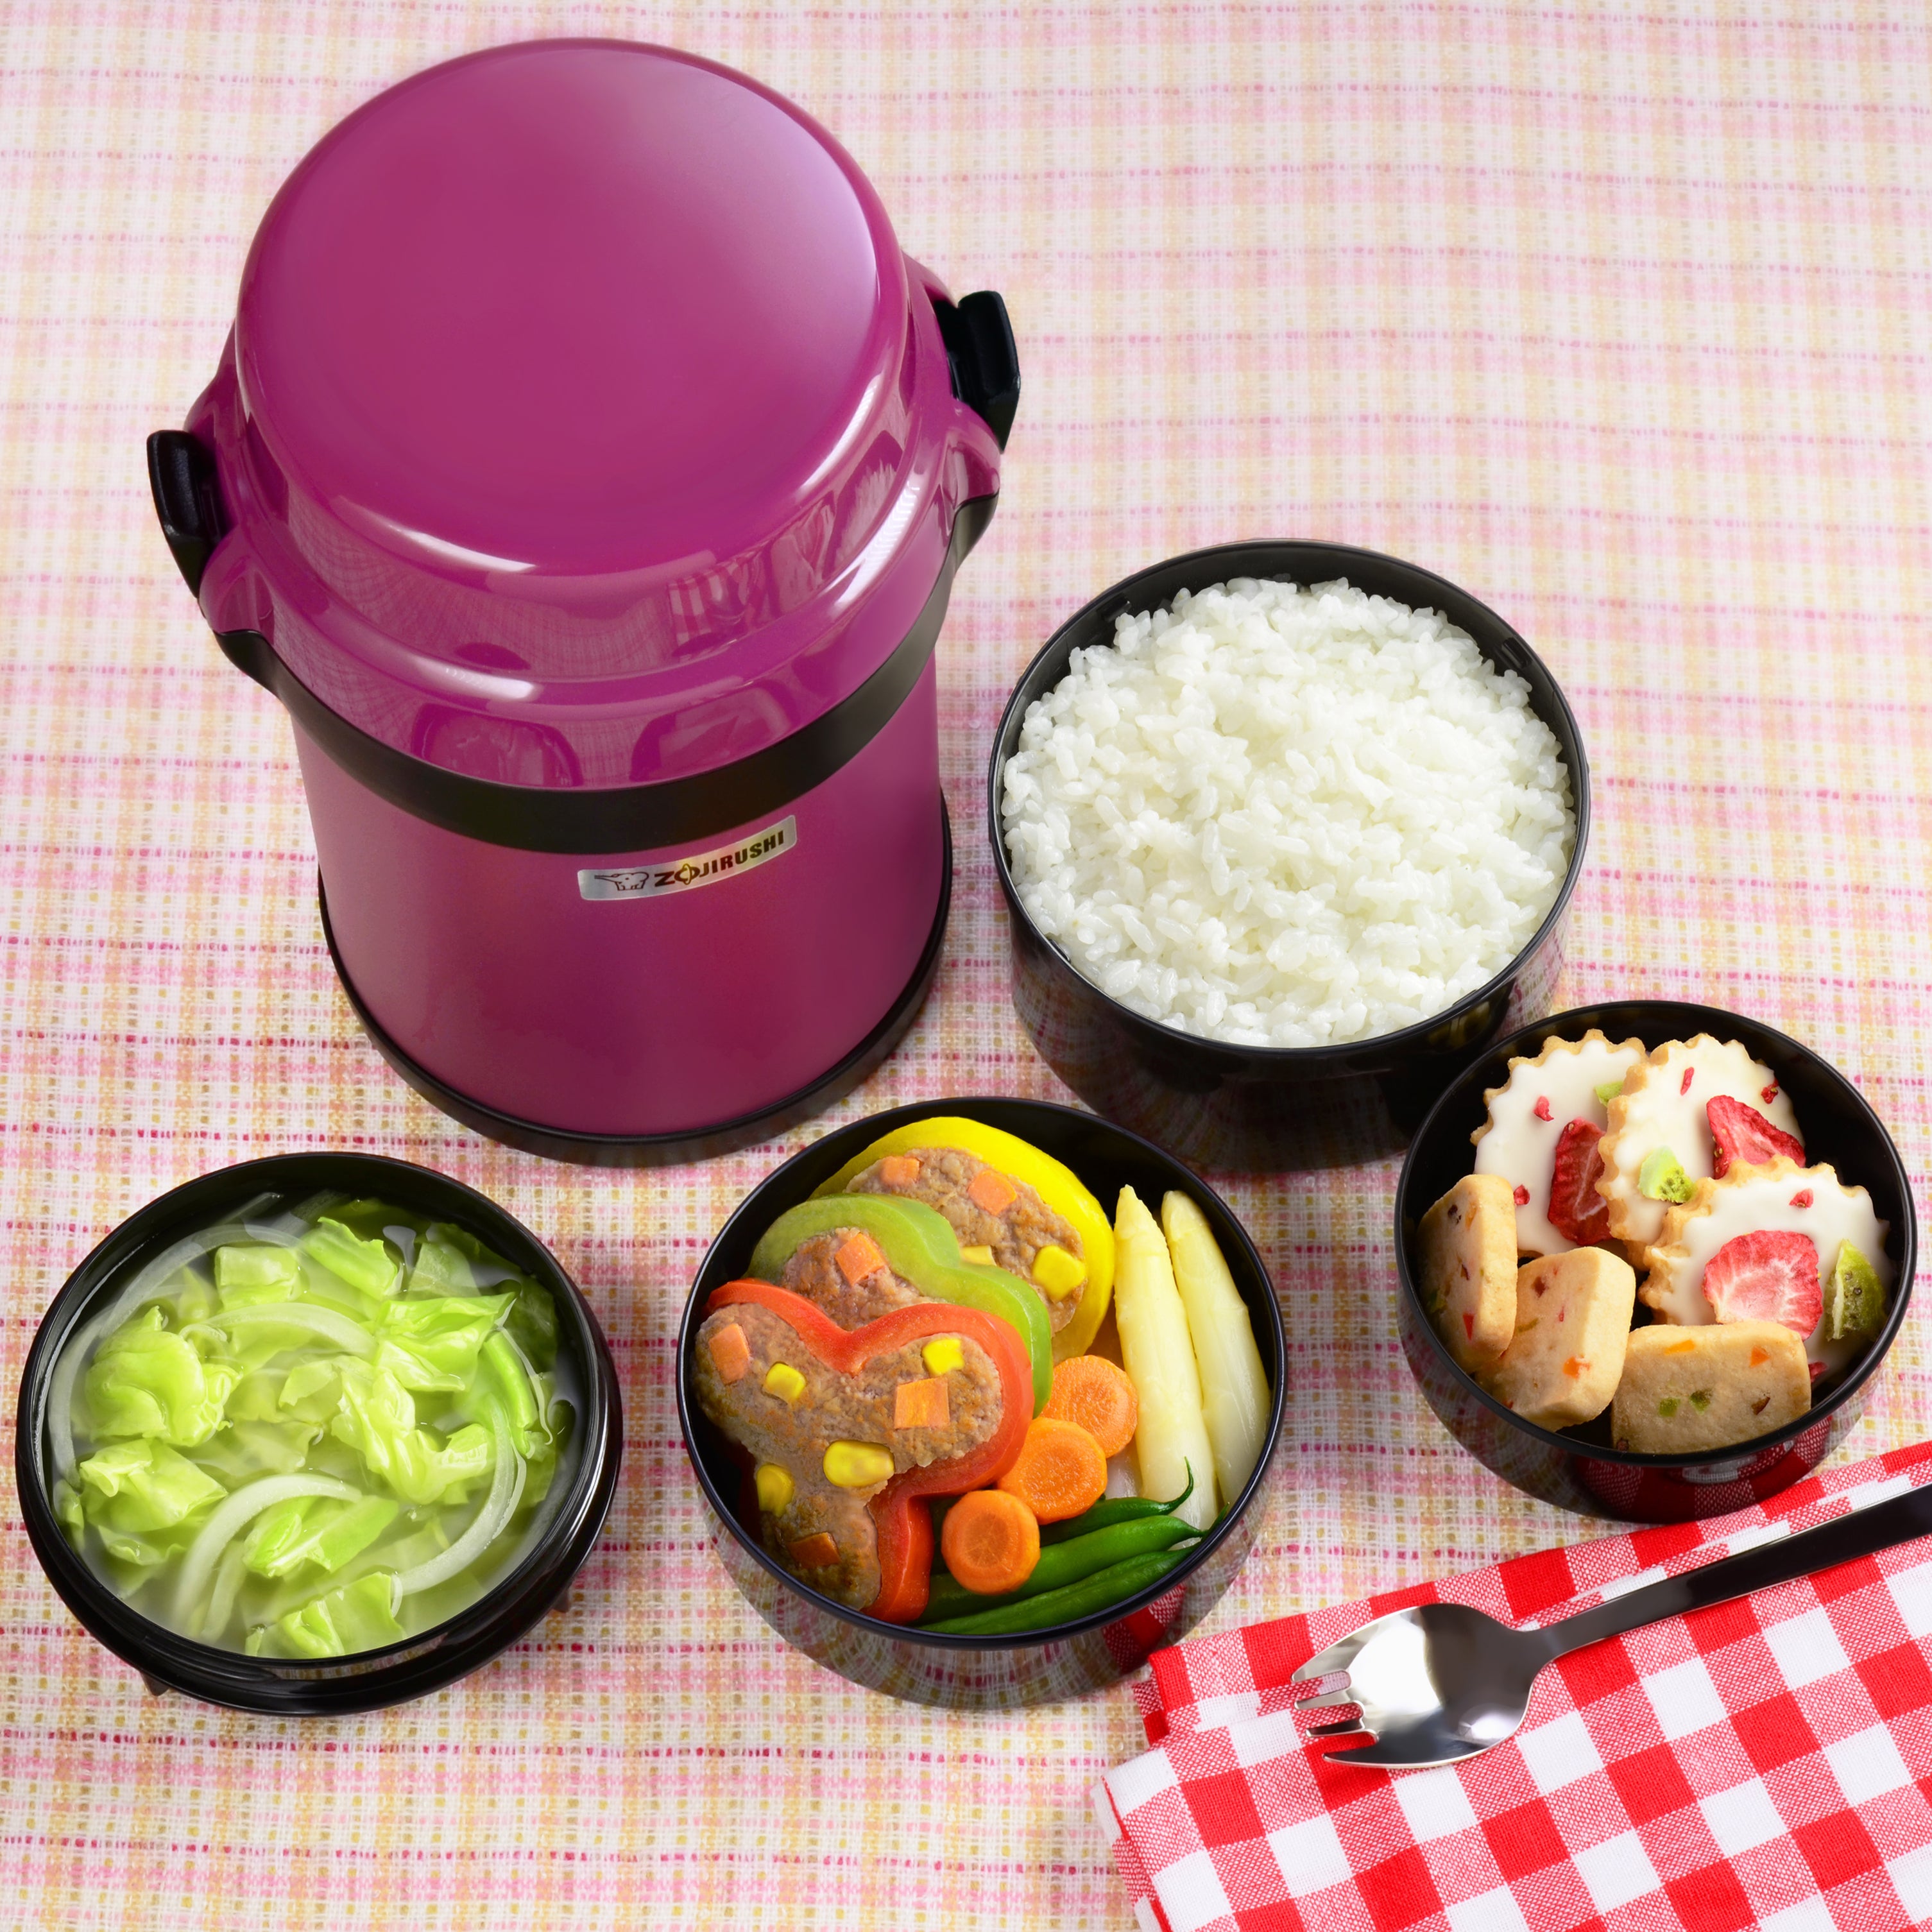 Vacuum Insulated Lunch Boxes - Zojirushi Online Store